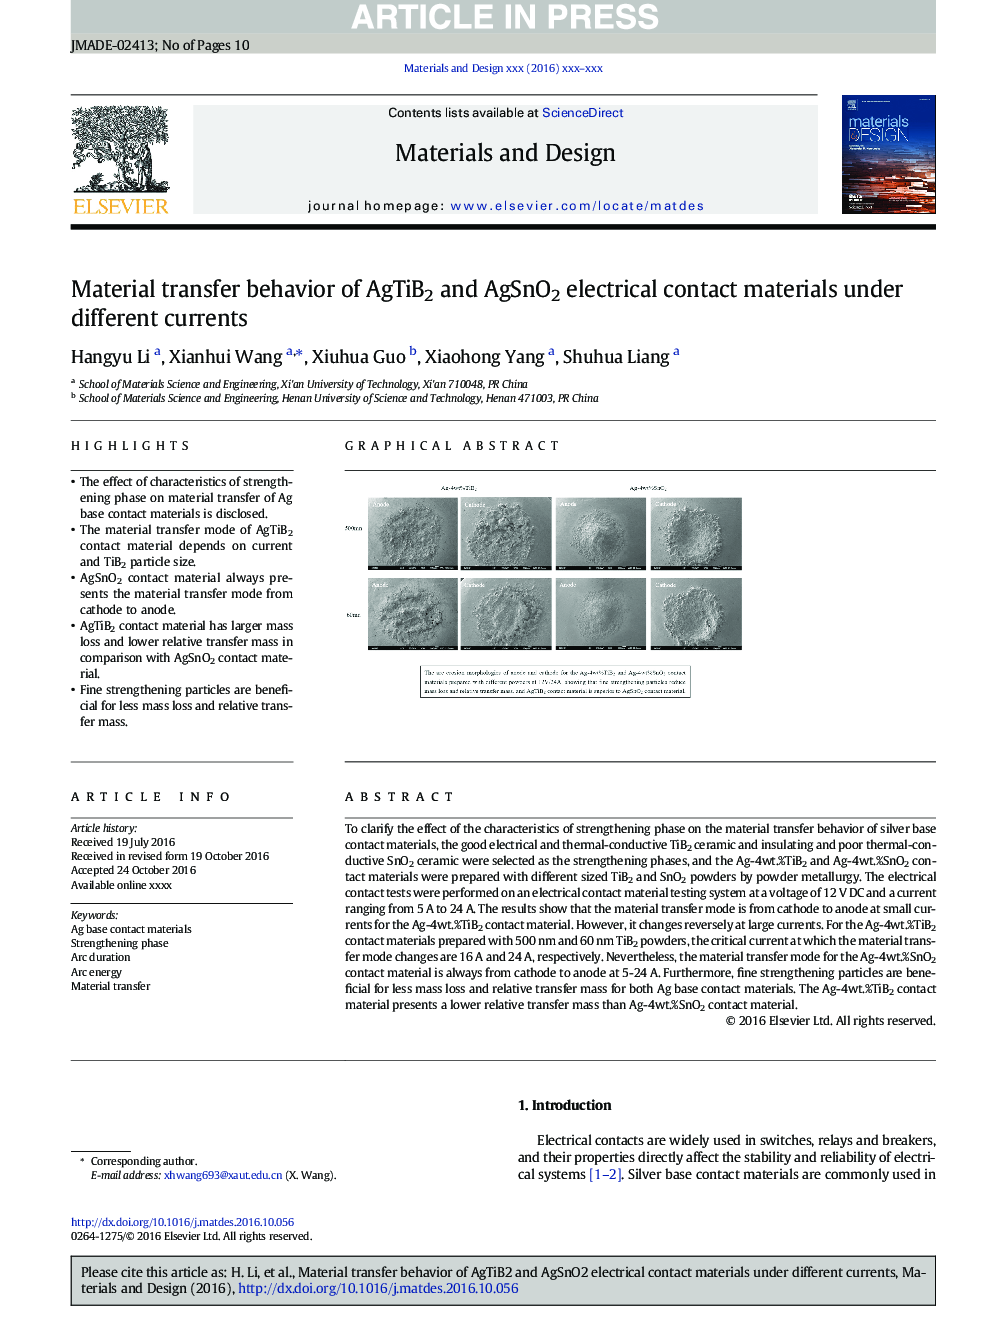 Material transfer behavior of AgTiB2 and AgSnO2 electrical contact materials under different currents